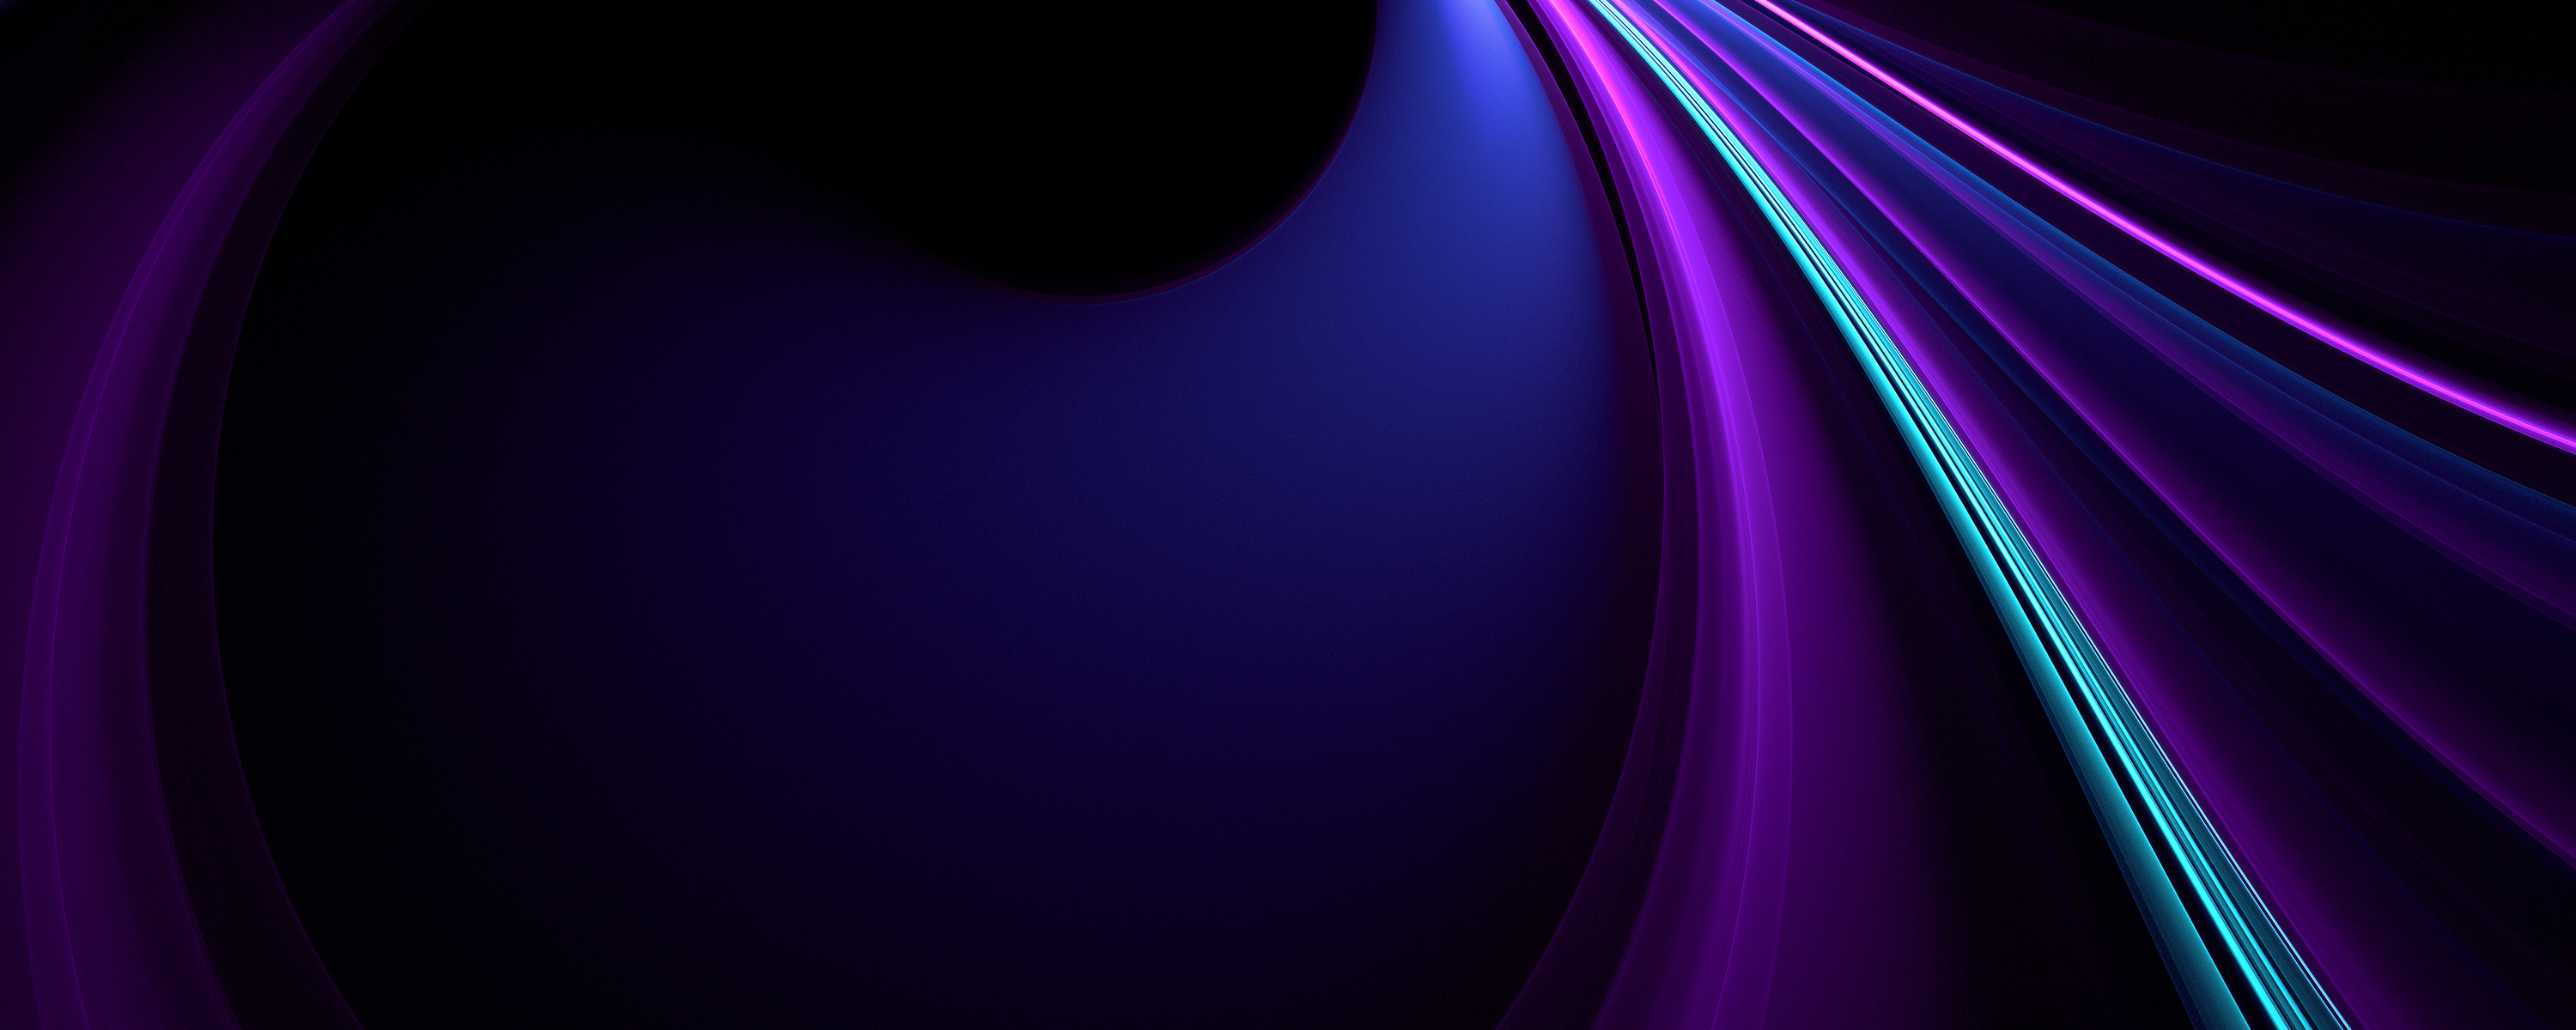 Curved Blue and Purple Lights in a Black Background